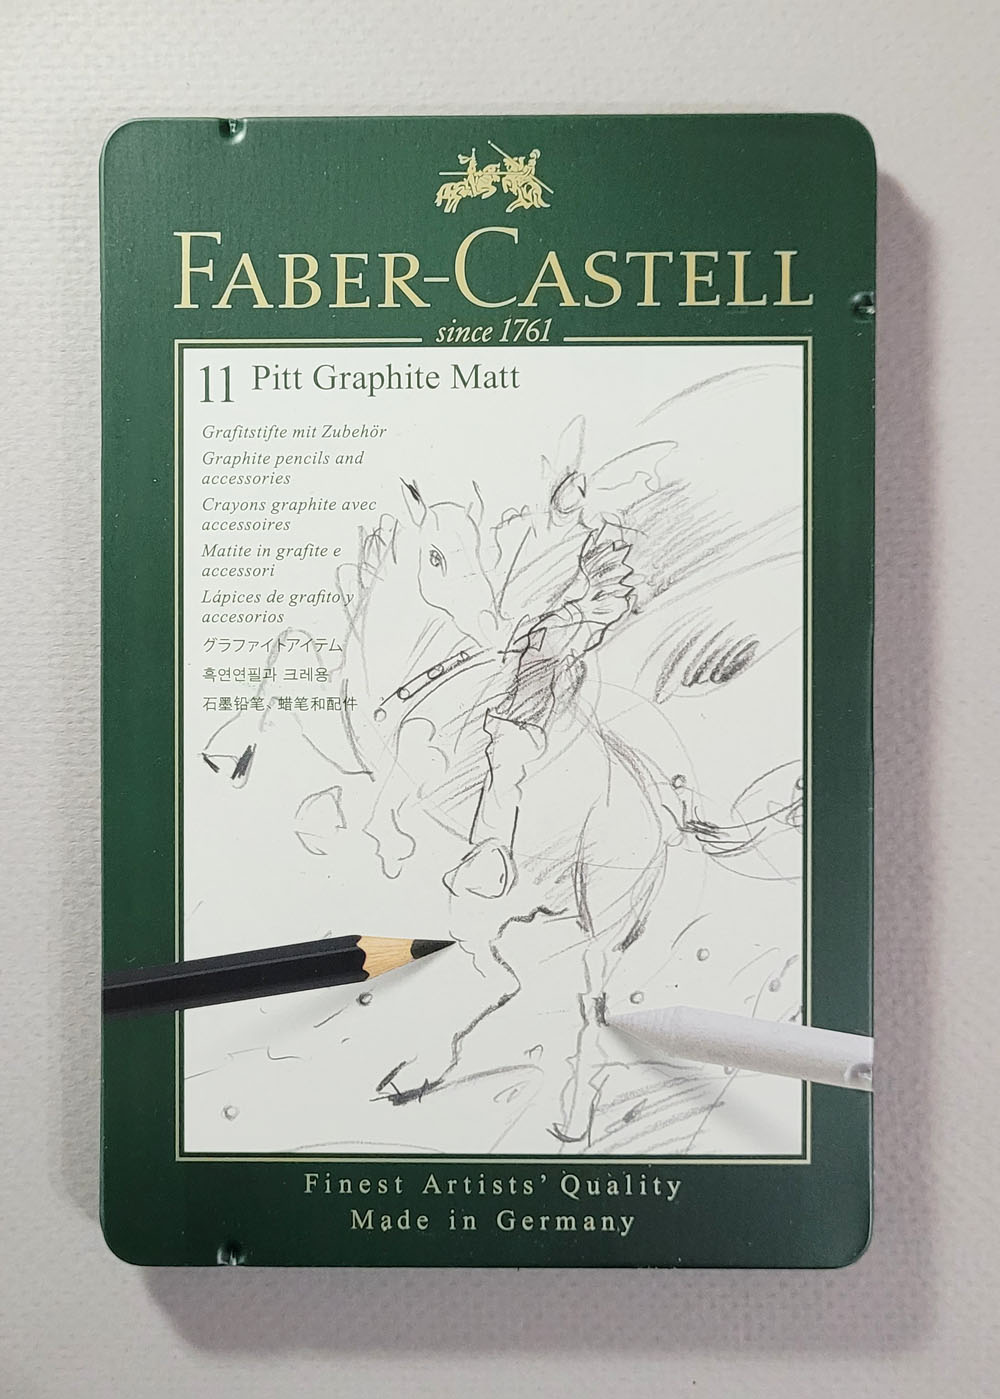 Fueled by Clouds & Coffee: Review: Faber-Castell Pitt Graphite Matt Pencils